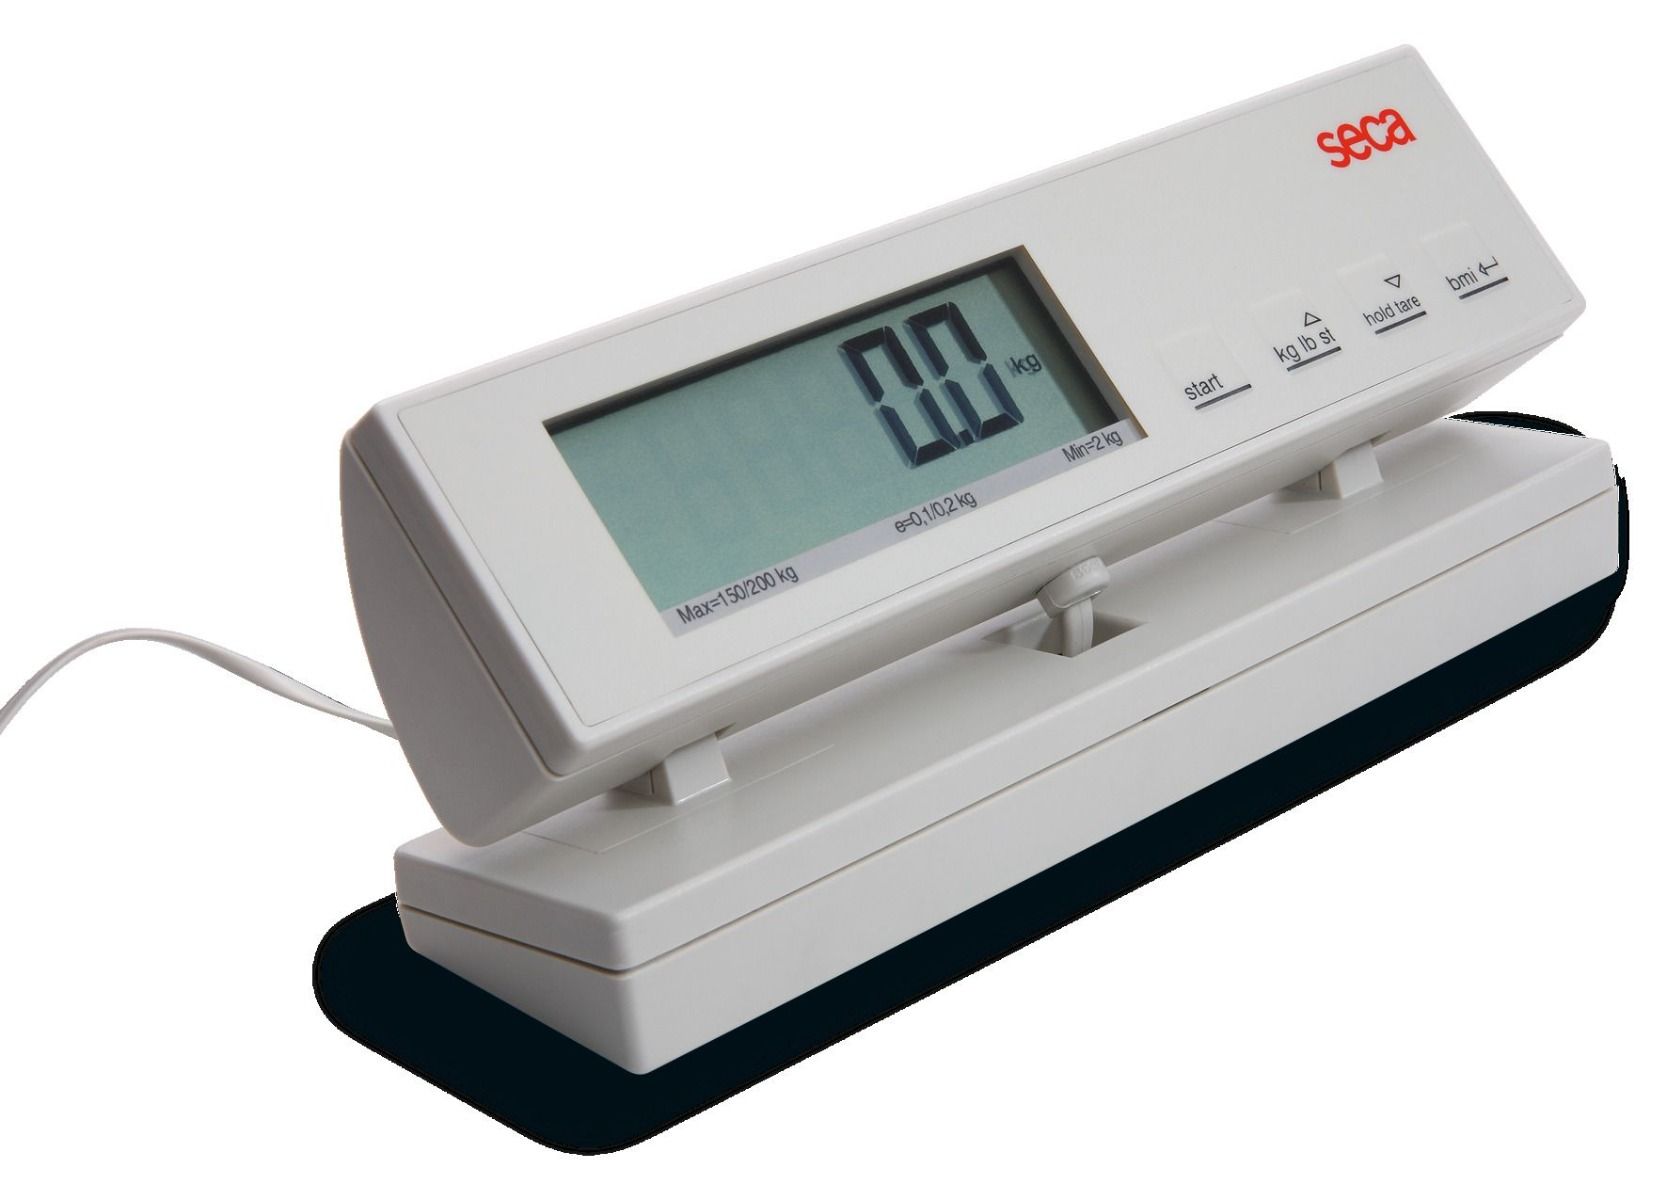 SECA DIGITAL FLAT SCALE WITH CABLE REMOTE DISPLAY photo